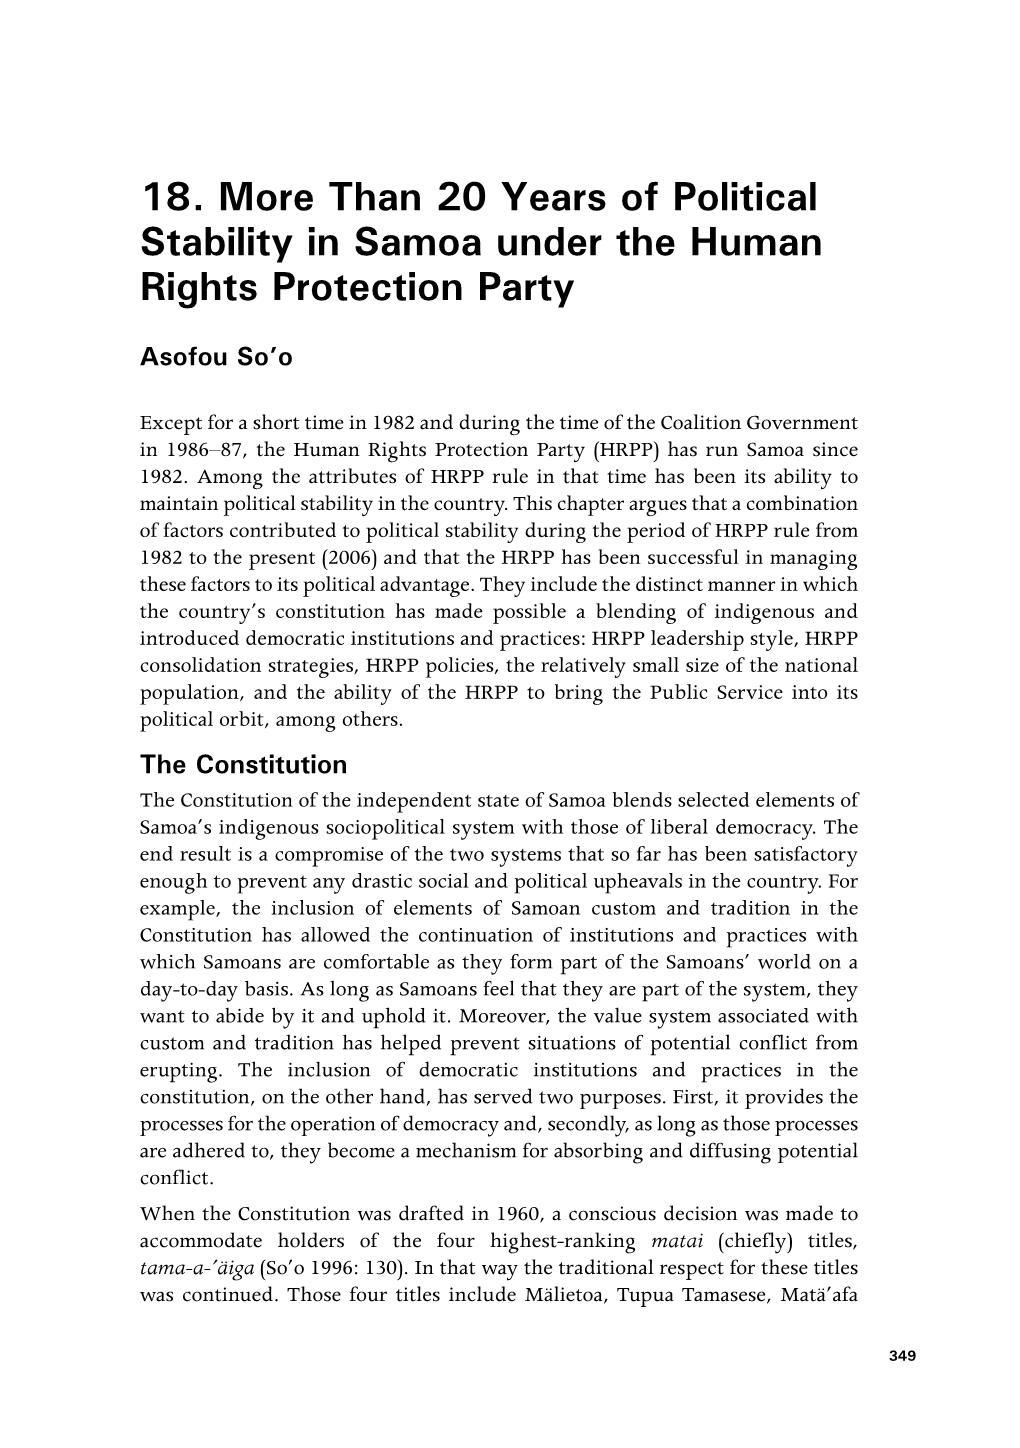 More Than 20 Years of Political Stability in Samoa Under the Human Rights Protection Party